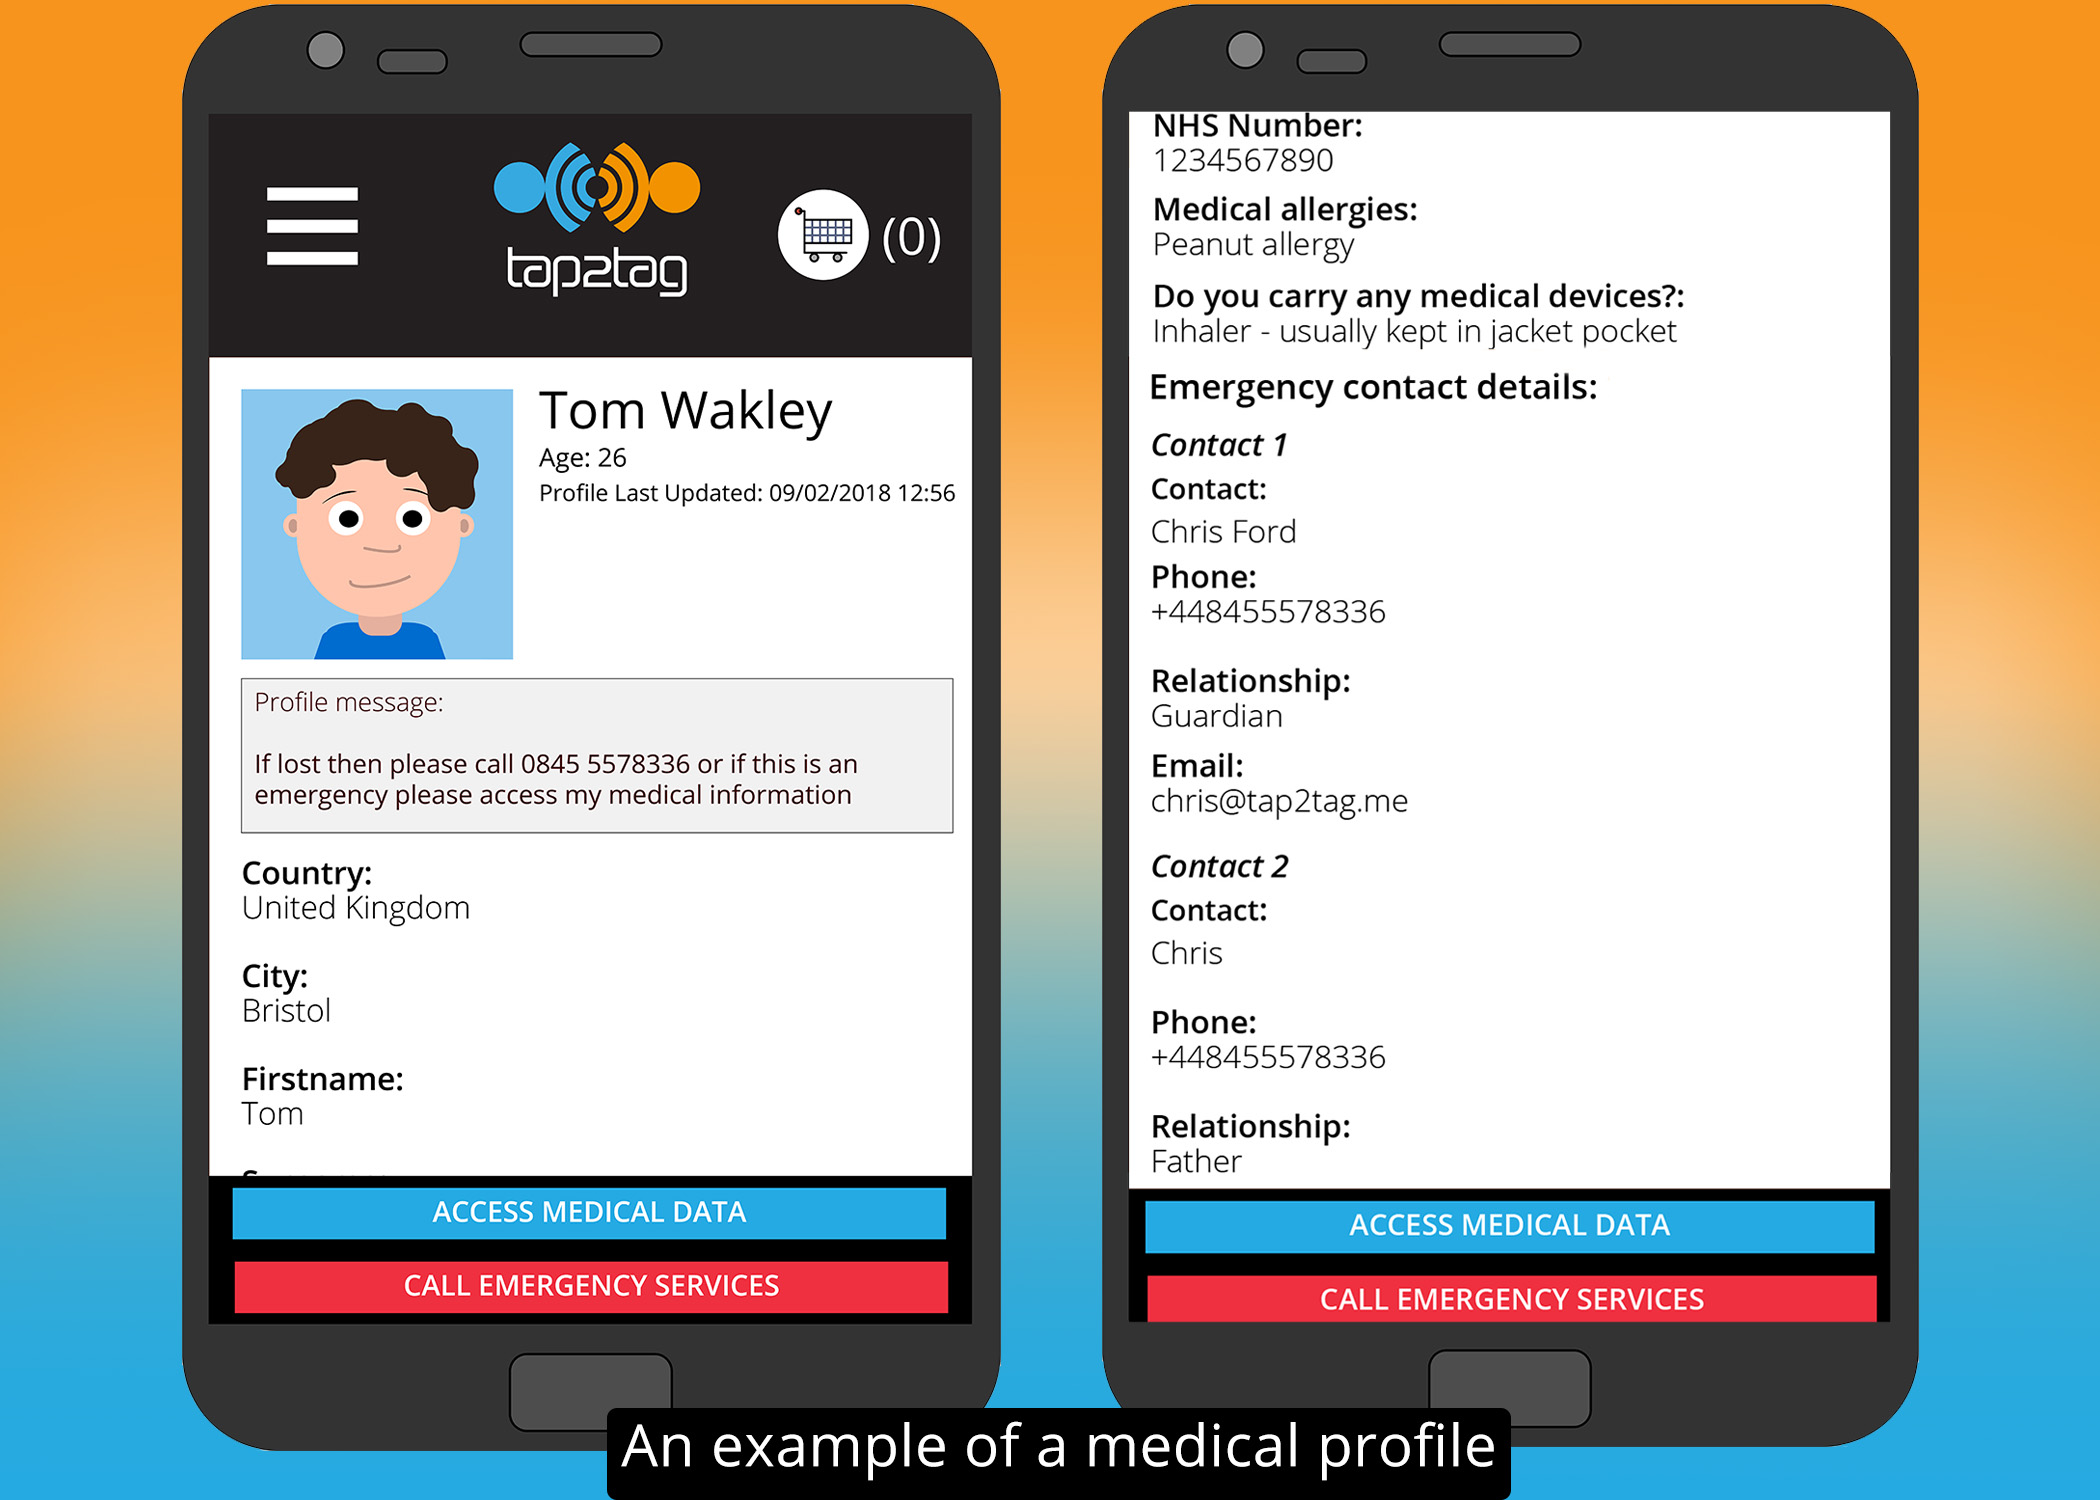 An example of what your medical profile may look like